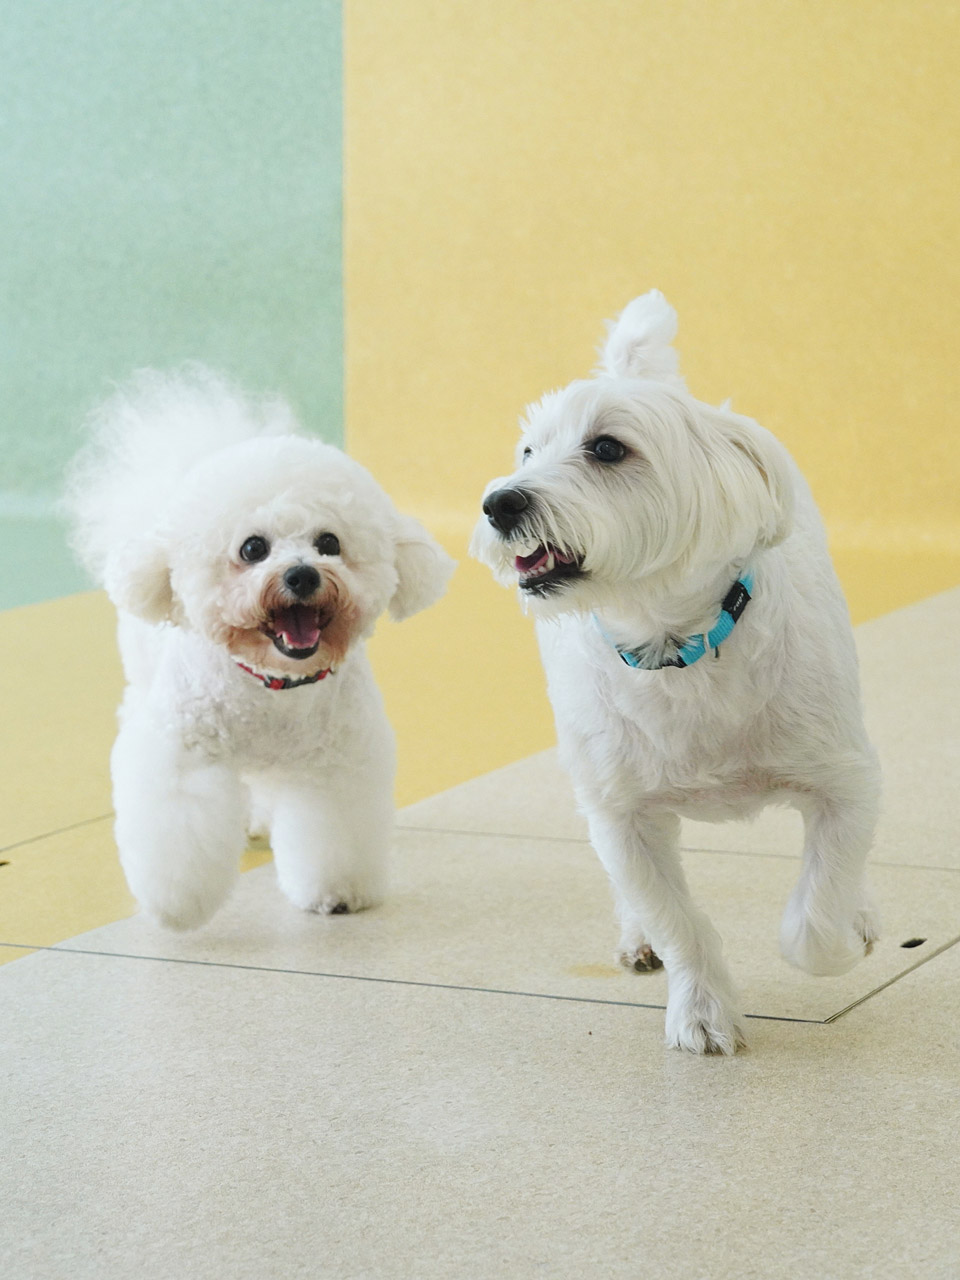 A Bichon Frise and West Highland Terrier running together during play time in our Montessori School programme.